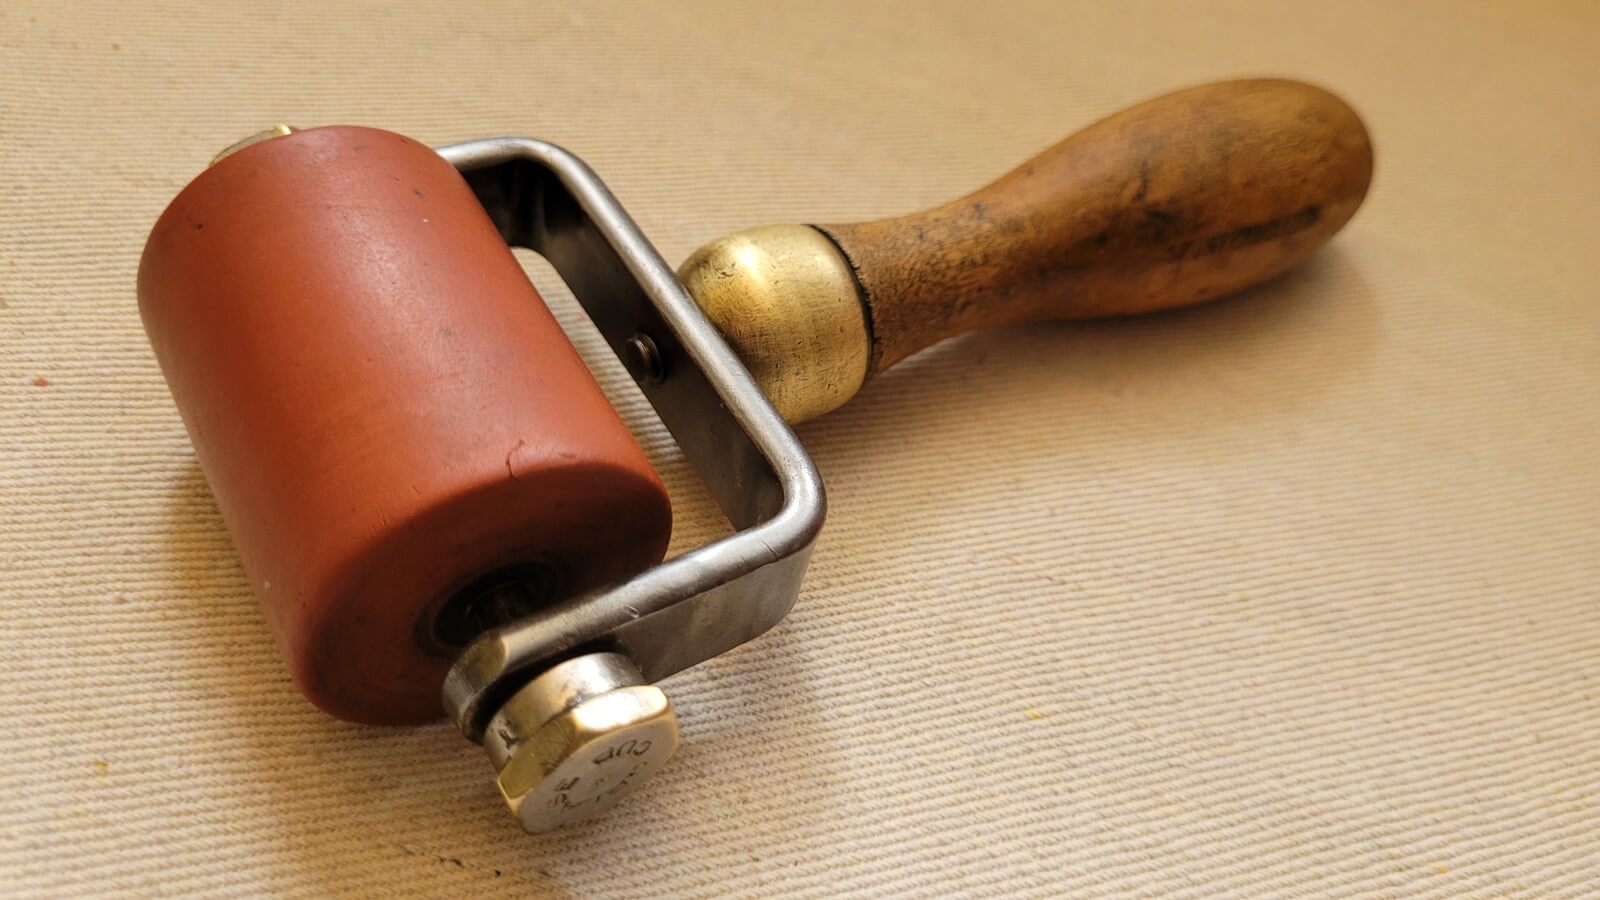 Vintage Hand Rubber Roller w Spunferruled 2 Brass & Wood Handle made by Nicholson - Artist and Printmaking Collectible Tools